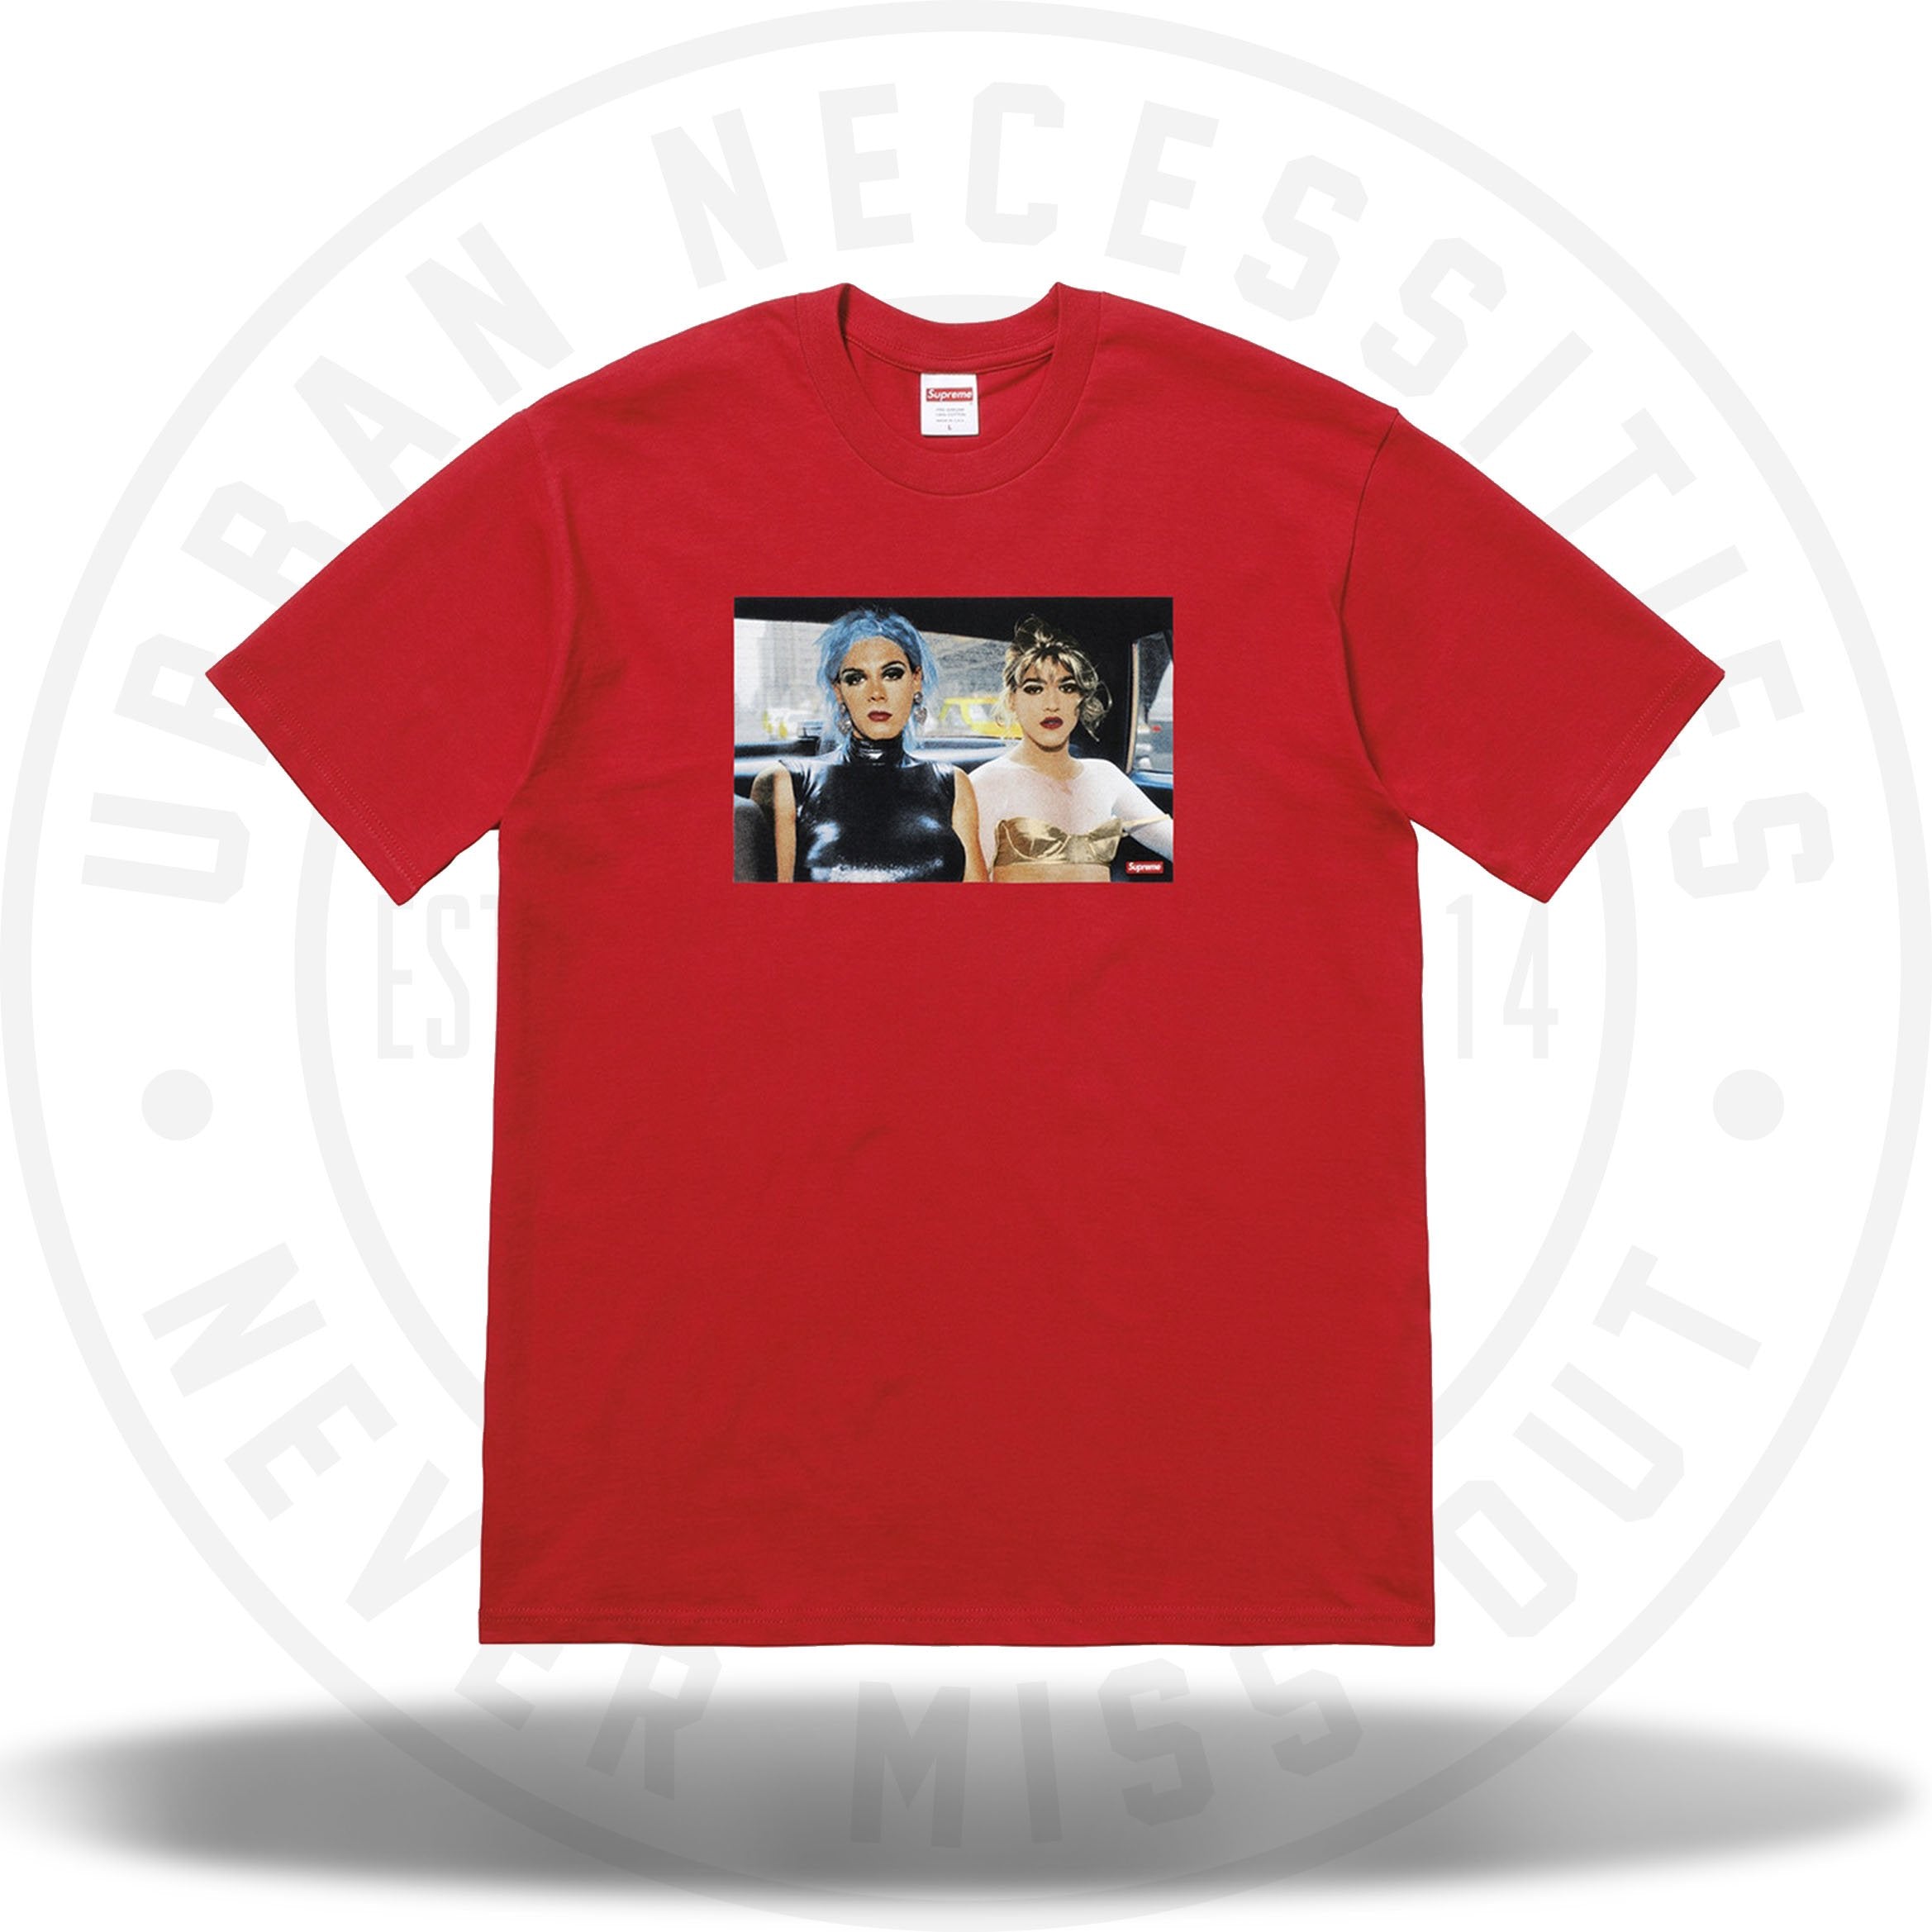 Supreme Nan Goldin Misty and Jimmy Paulette Tee Red